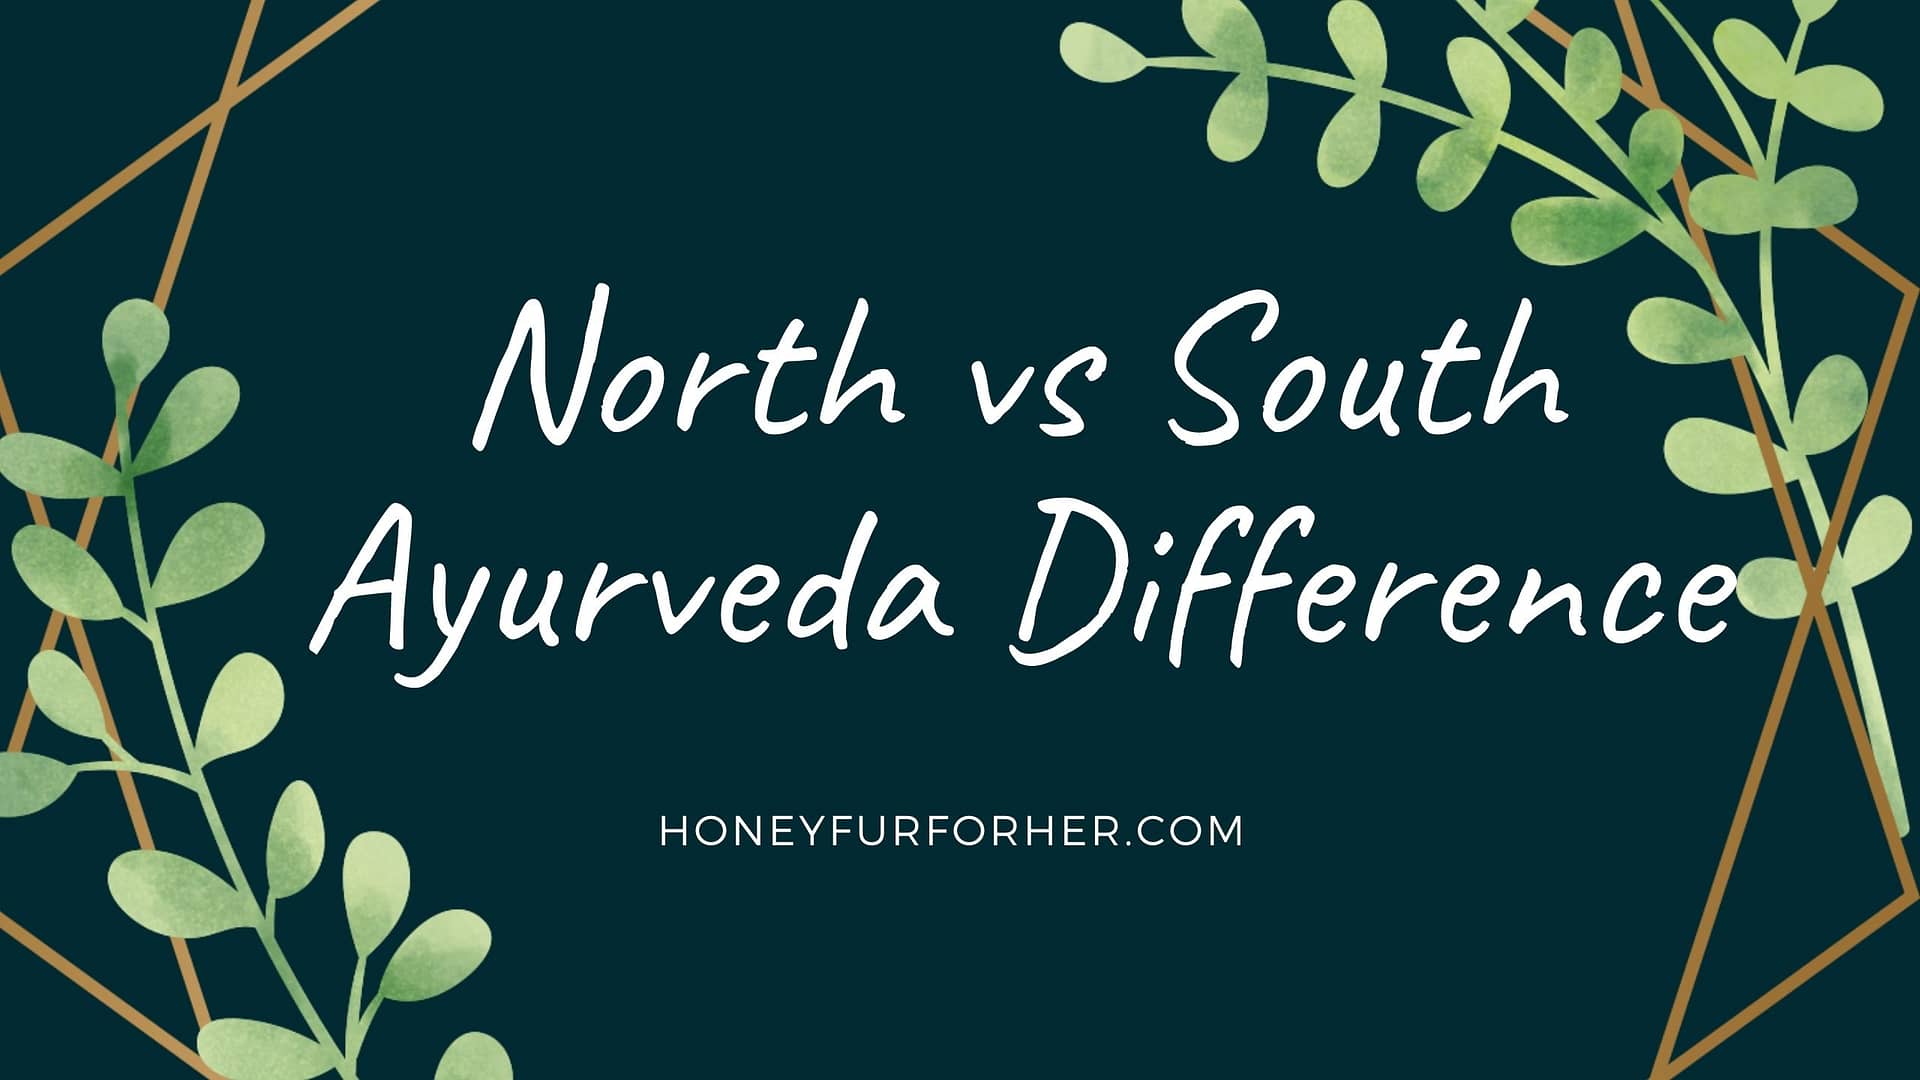 North Vs South Ayurveda Difference Feature Image